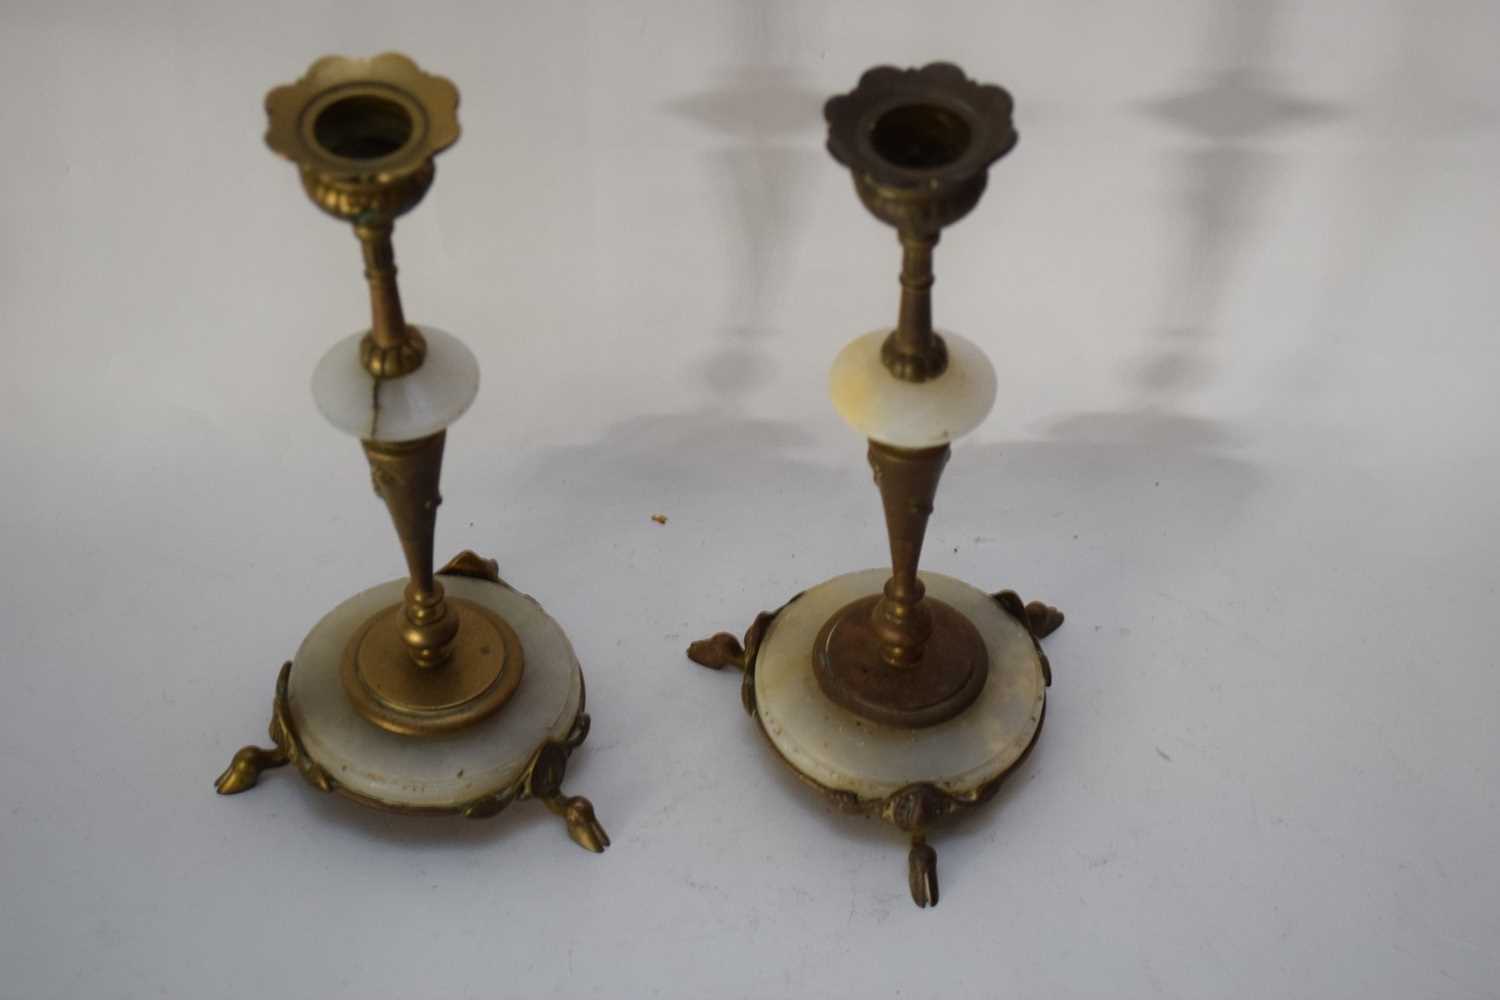 Pair of brass candlesticks with onyx mounts - Image 2 of 2